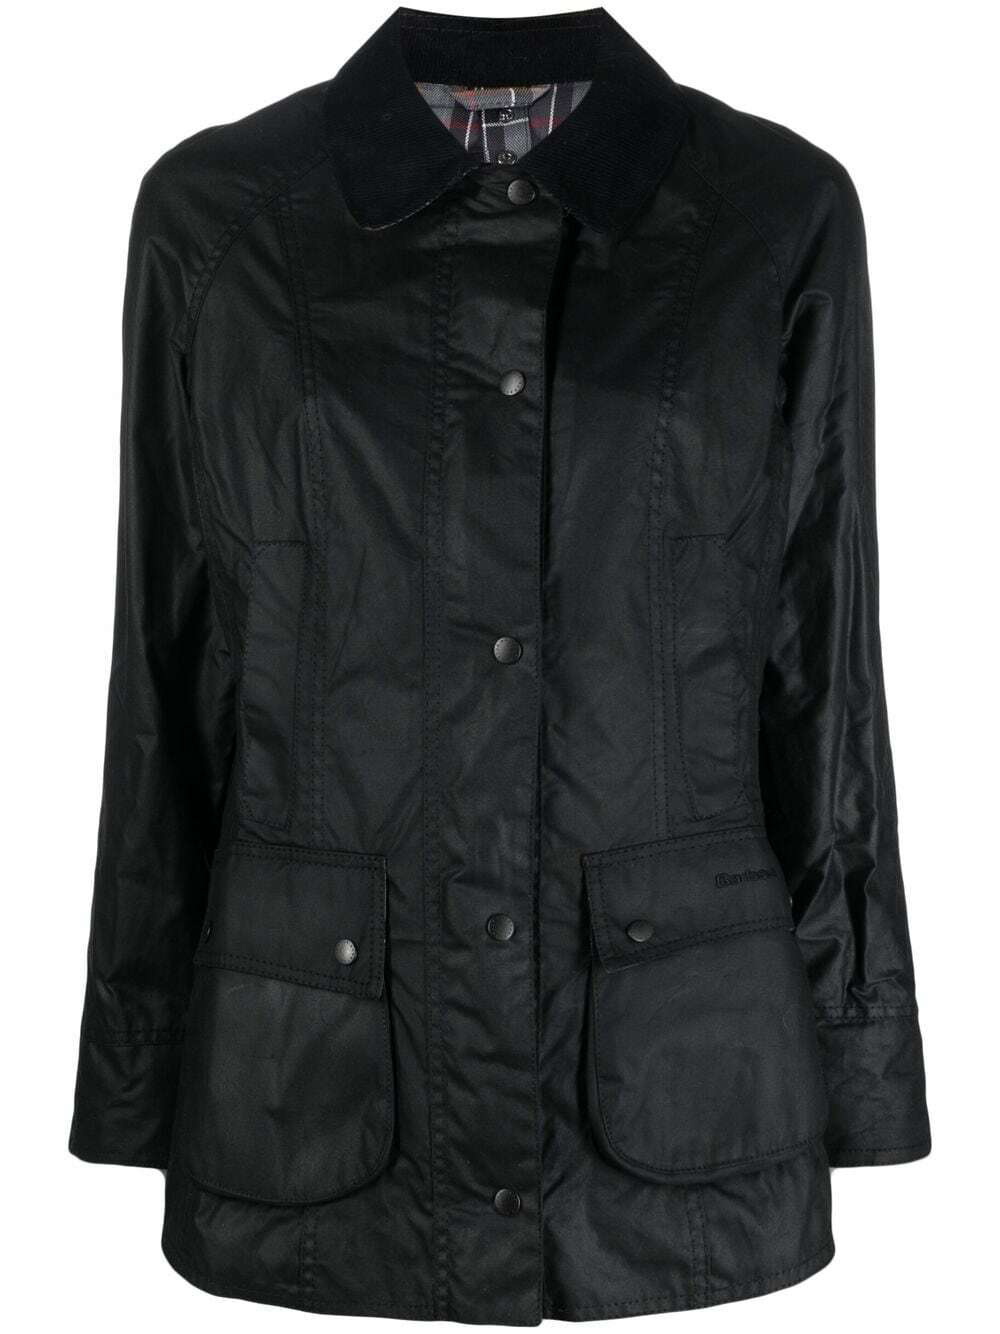 BARBOUR - Beadnell Waxed Cotton Jacket Barbour